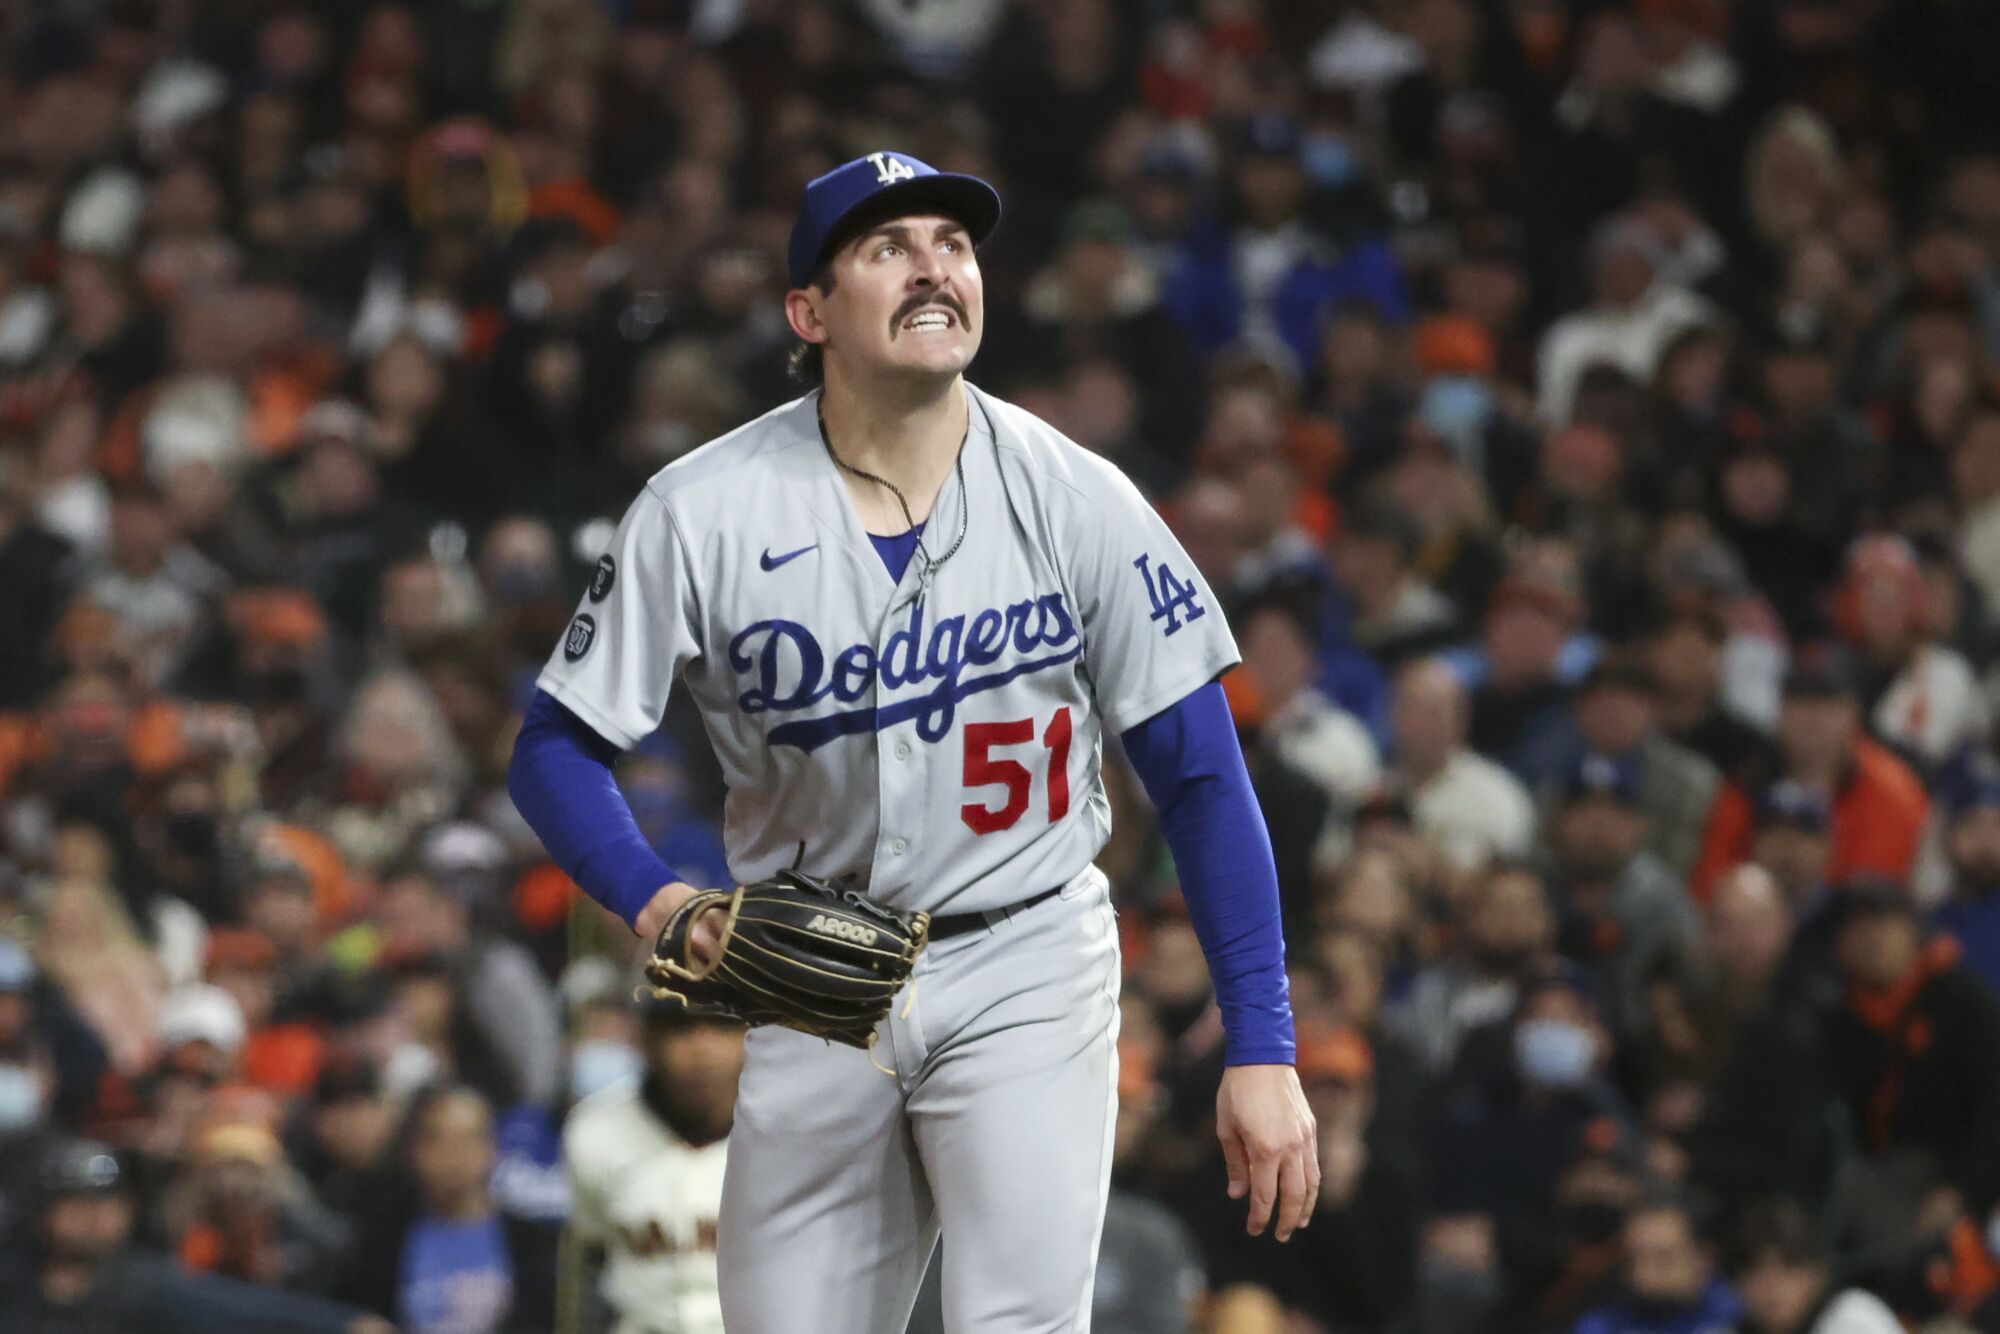 Dodgers relief pitcher Alex Vesia reacts allowing a solo home run by Giants' Brandon Crawford